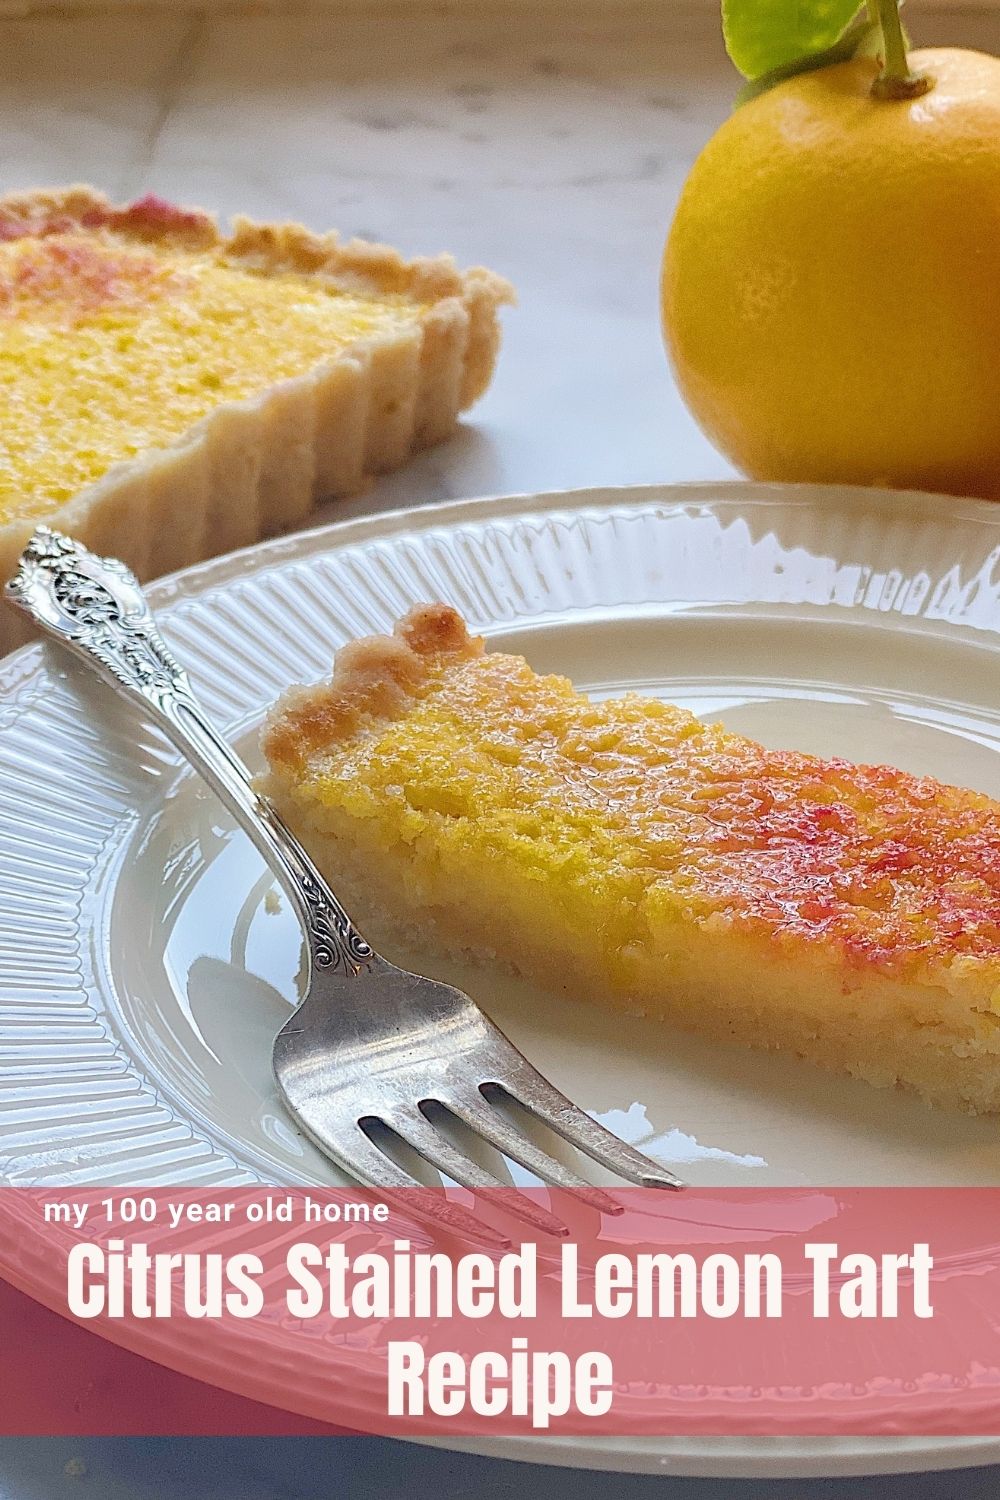 Today I am sharing a new dessert recipe. It's a Citrus Stained Lemon Tart Recipe and it is so good! I am pretty sure this is the first Citrus Stained Lemon Tart in the world.